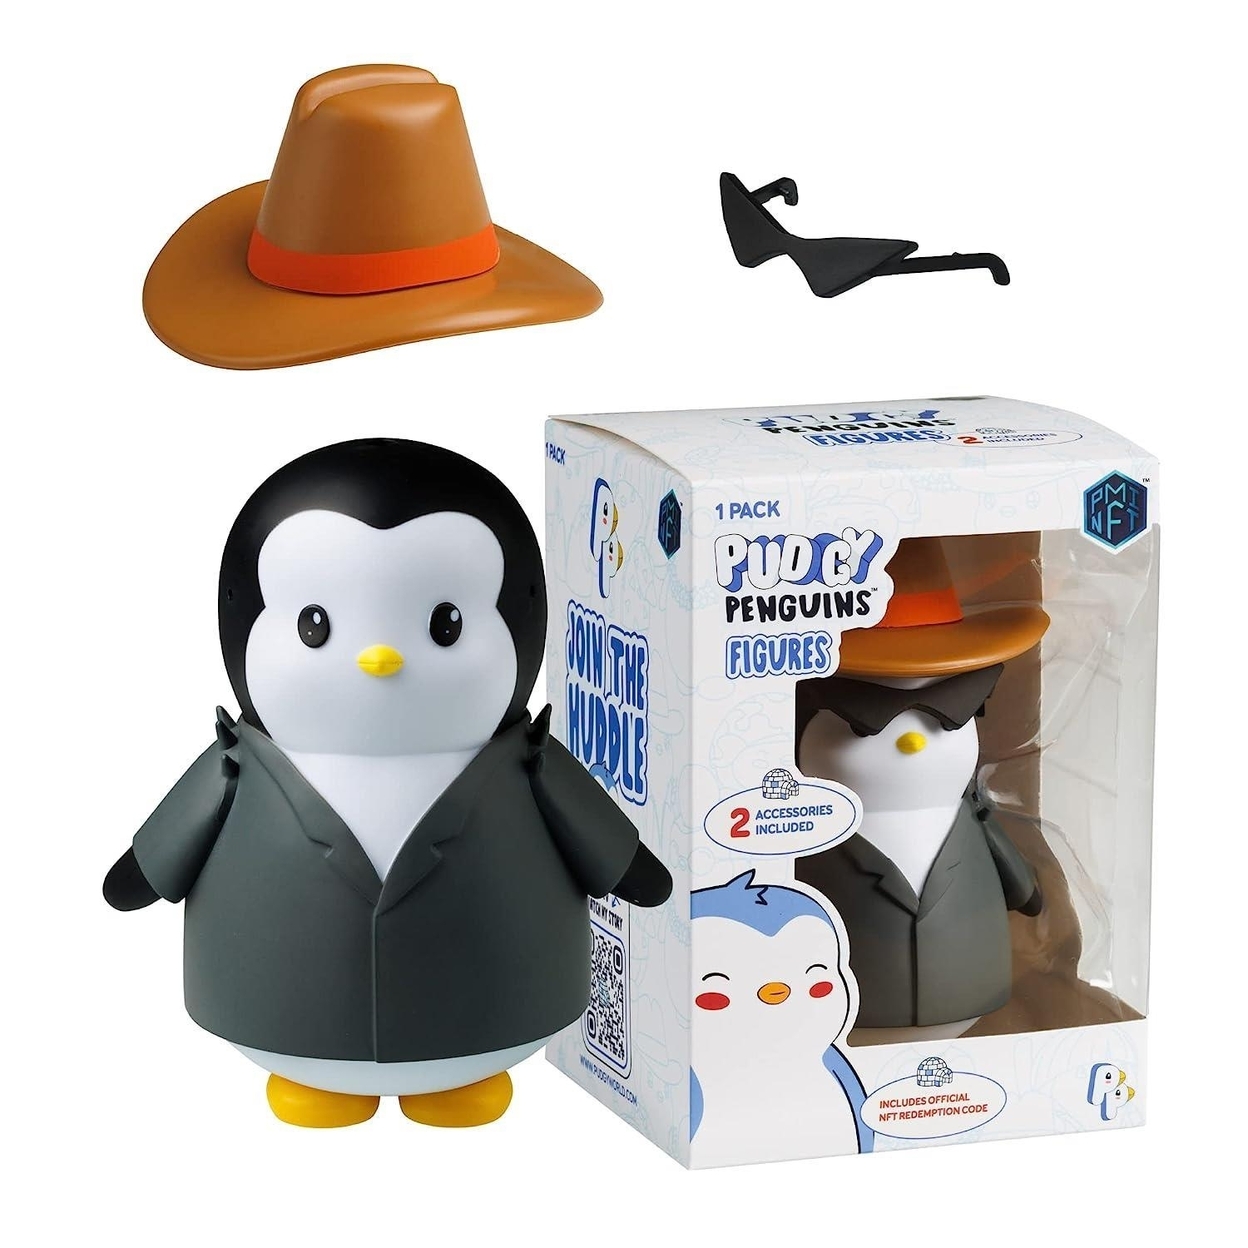 Pudgy Penguins Cowboy Adopt Forever Friend Customize Outfits Figure